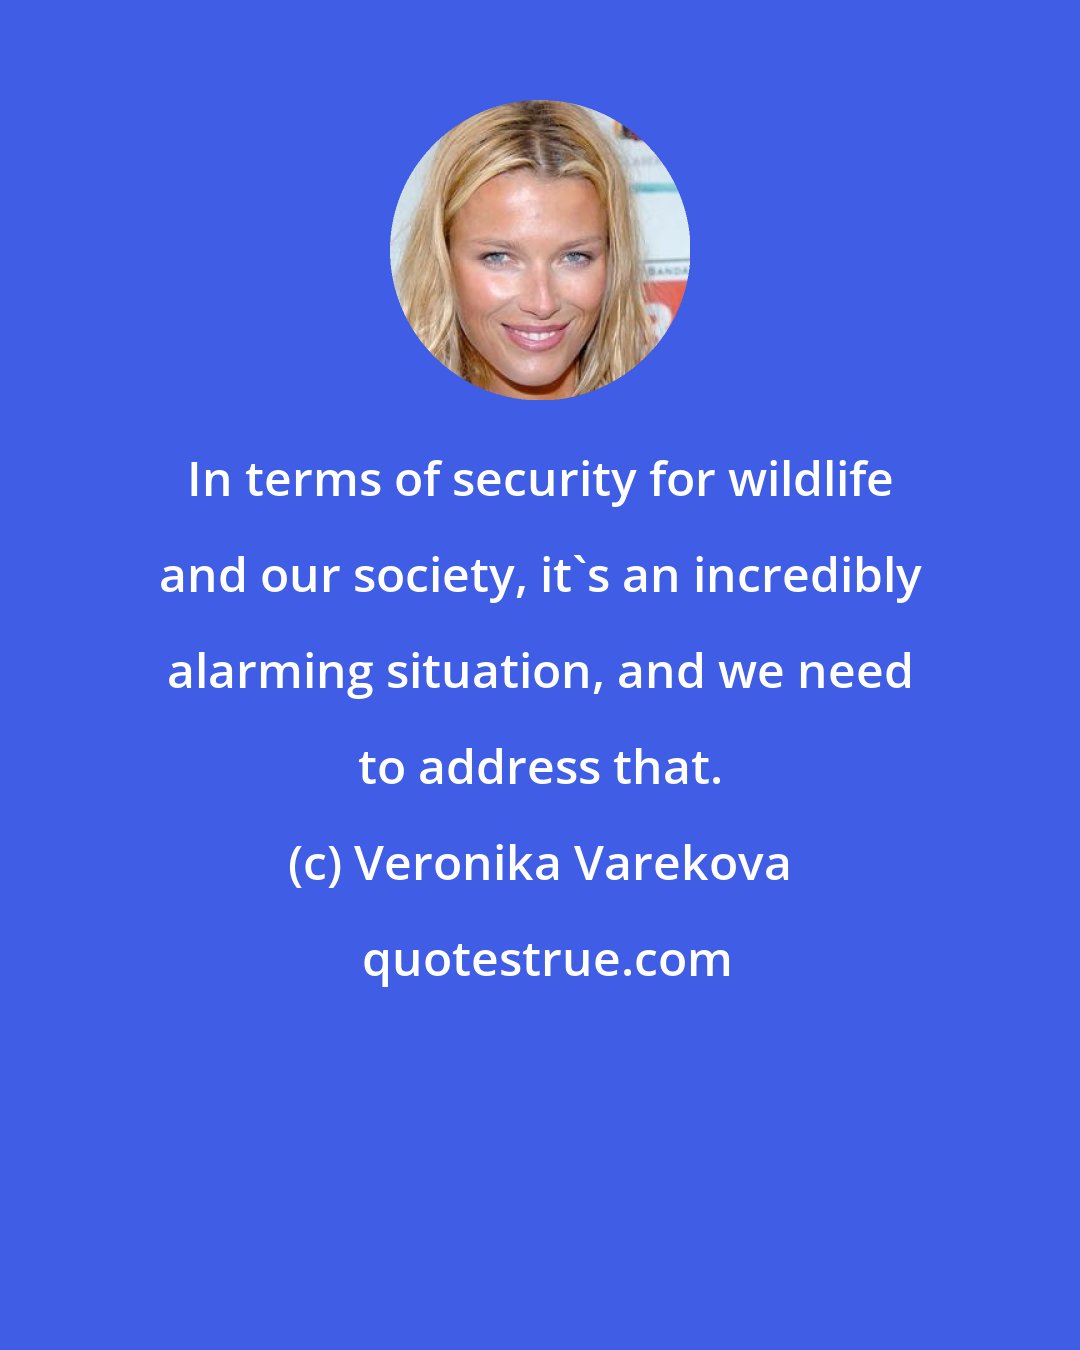 Veronika Varekova: In terms of security for wildlife and our society, it's an incredibly alarming situation, and we need to address that.